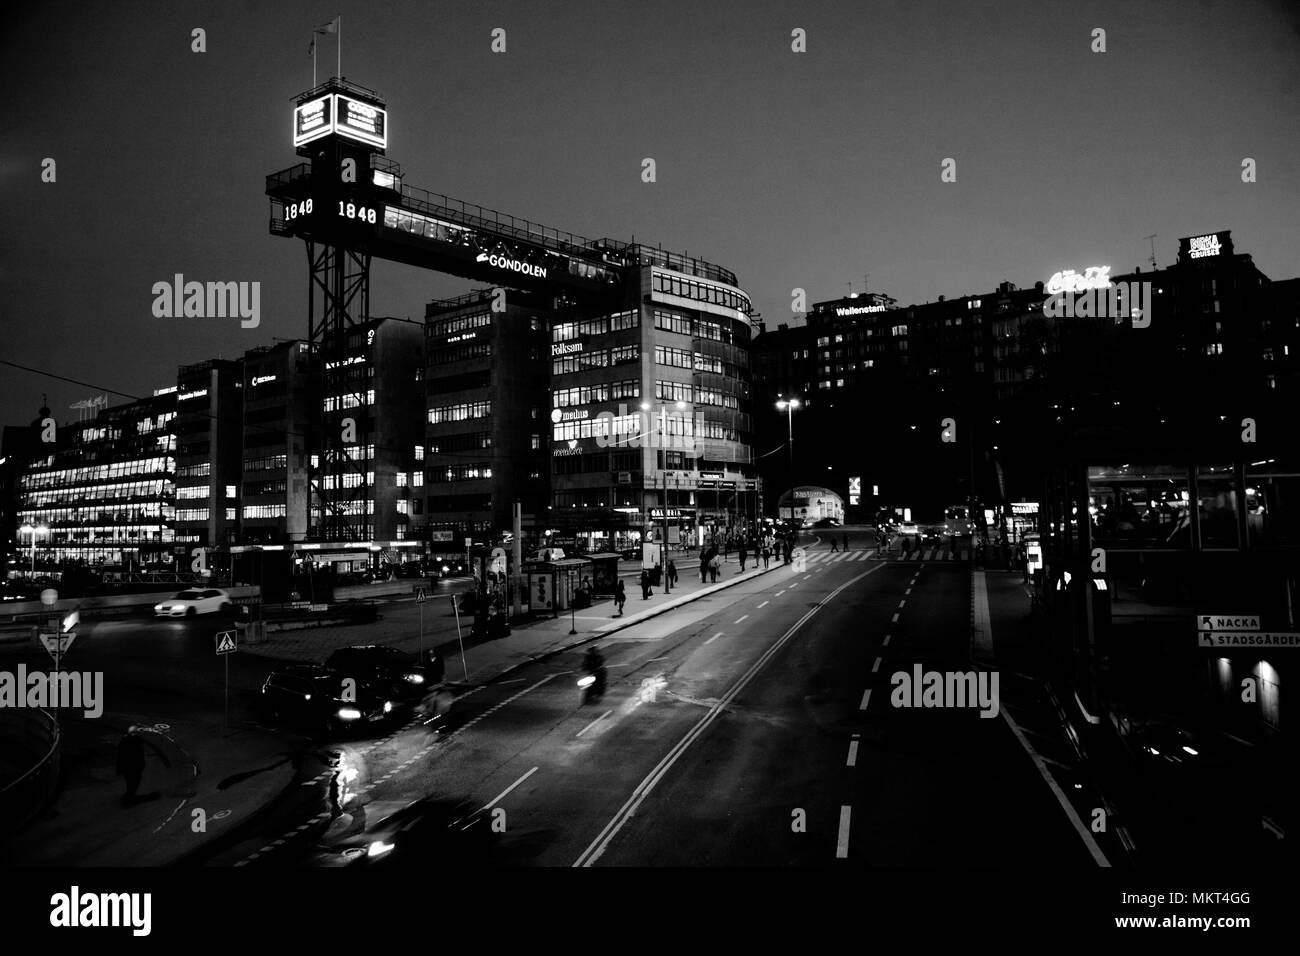 STOCKHOLM, SWEDEN - OCTOBER 5, 2011: Evening scene at 'Slussen', which is a hub for subway, suburban trains and ferries in Stockholm. Stock Photo